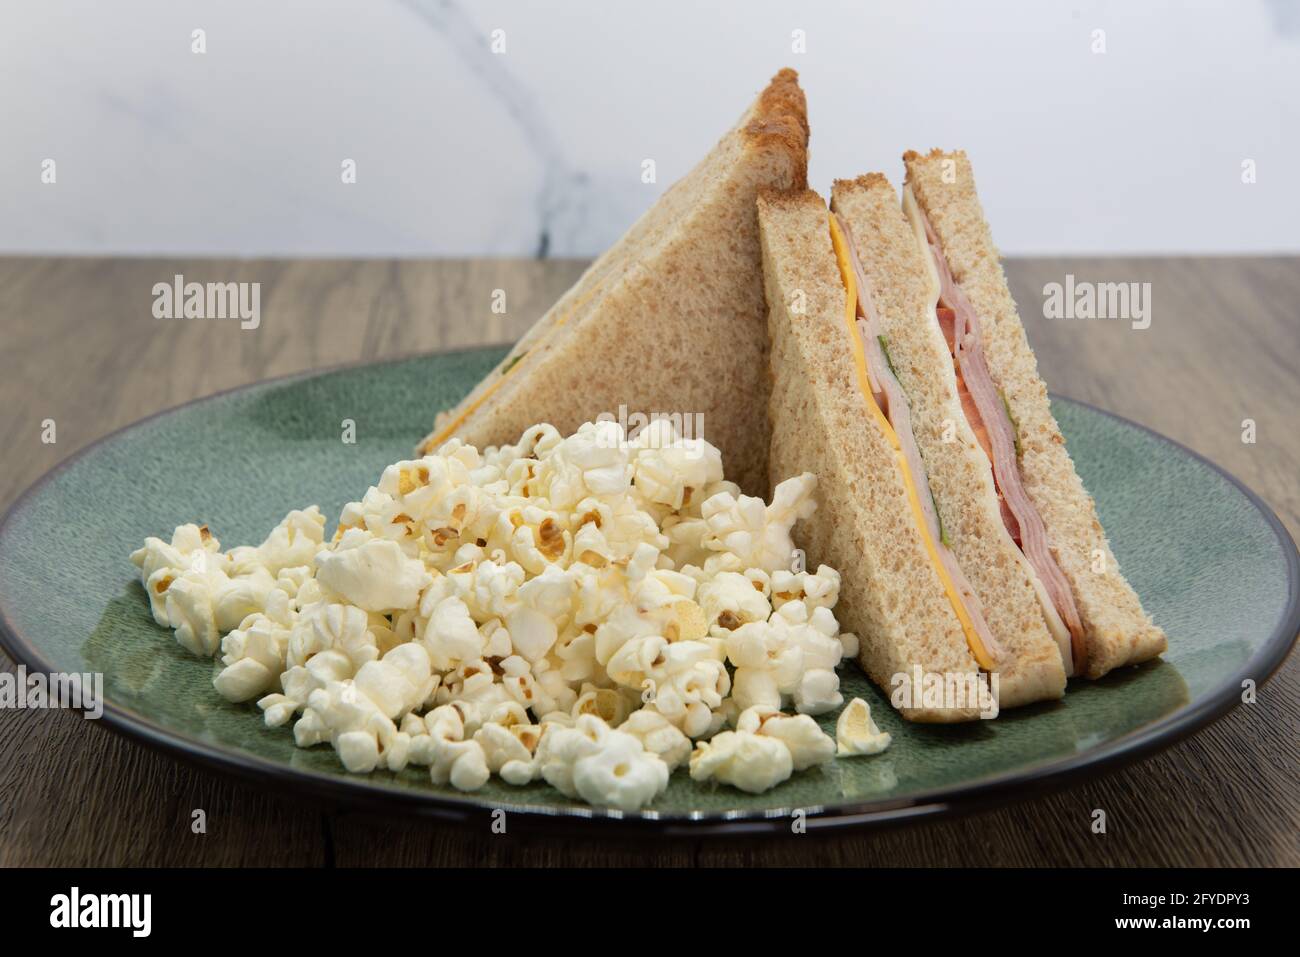 Double deck ham and cheese sandwich and popcorn is a perfect meal for a quick lunch break at work. Stock Photo